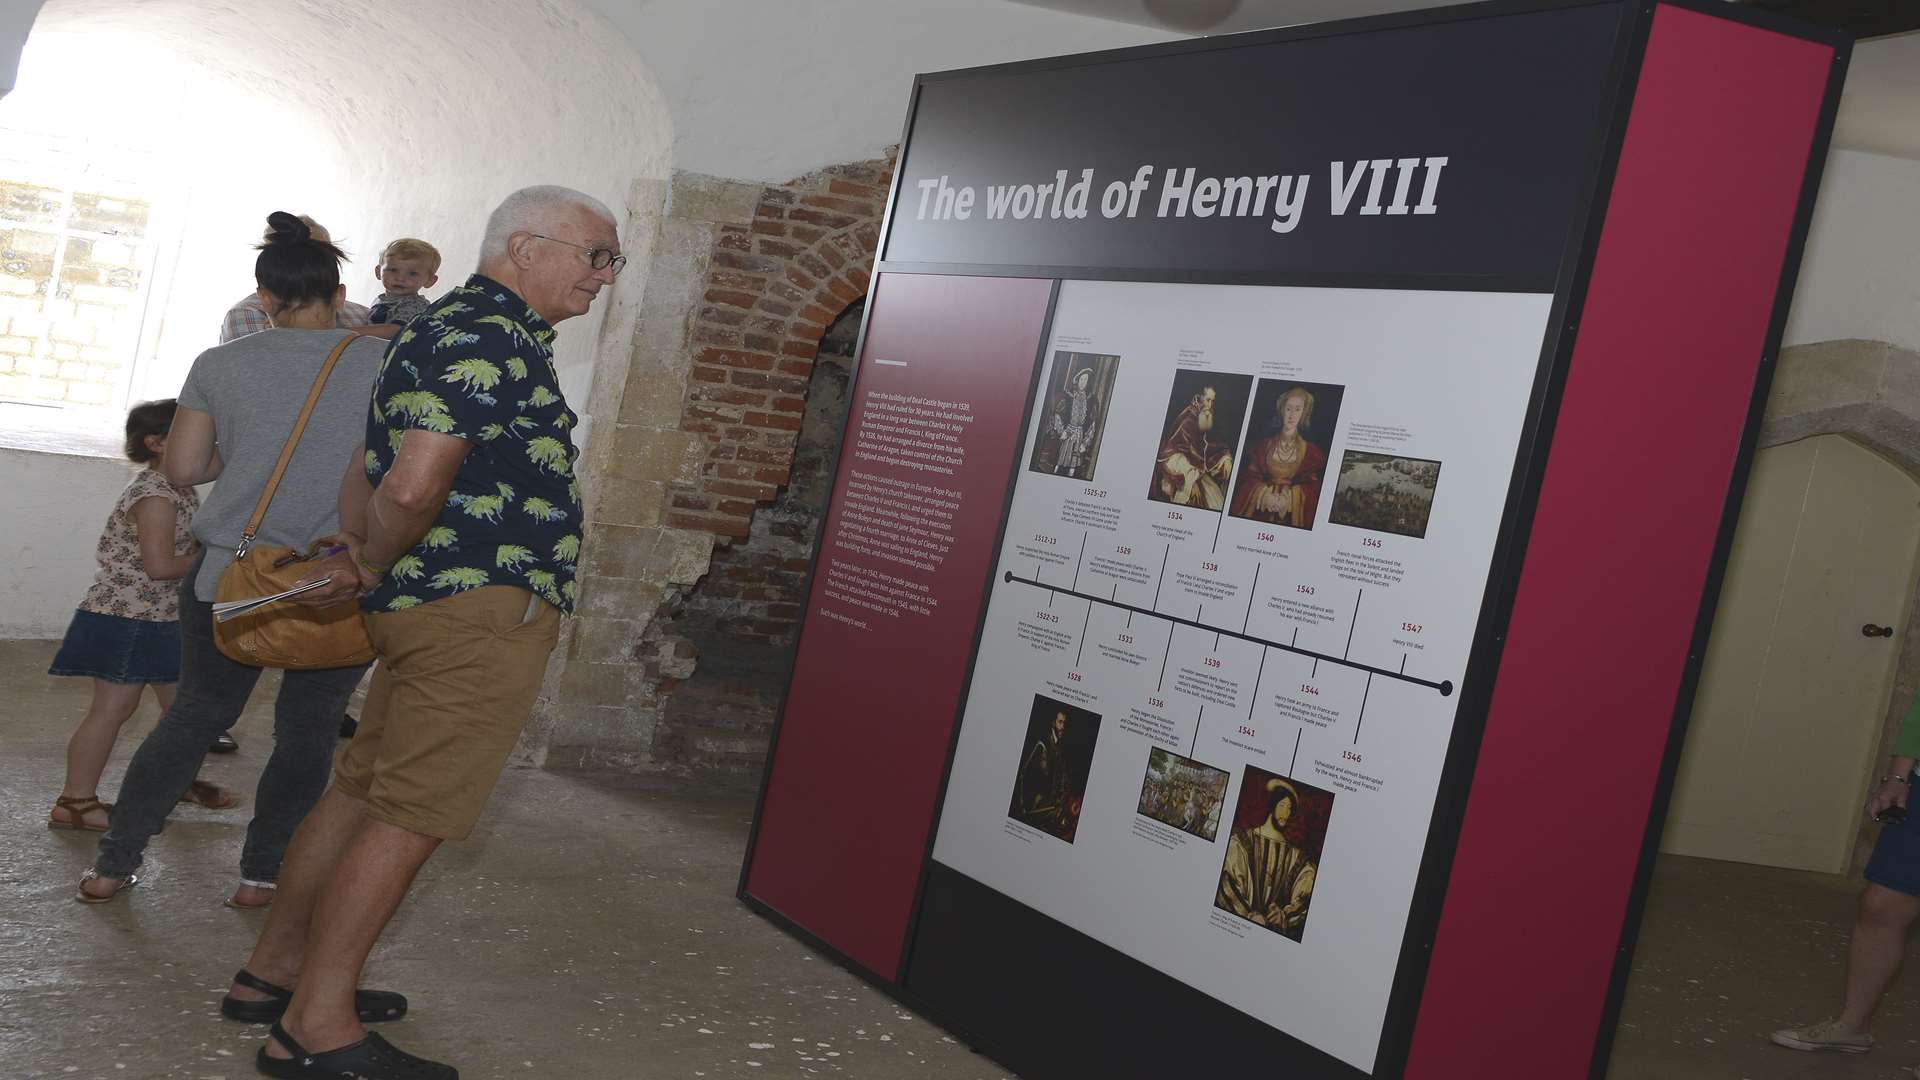 A new exhibition is now on show at Deal Castle